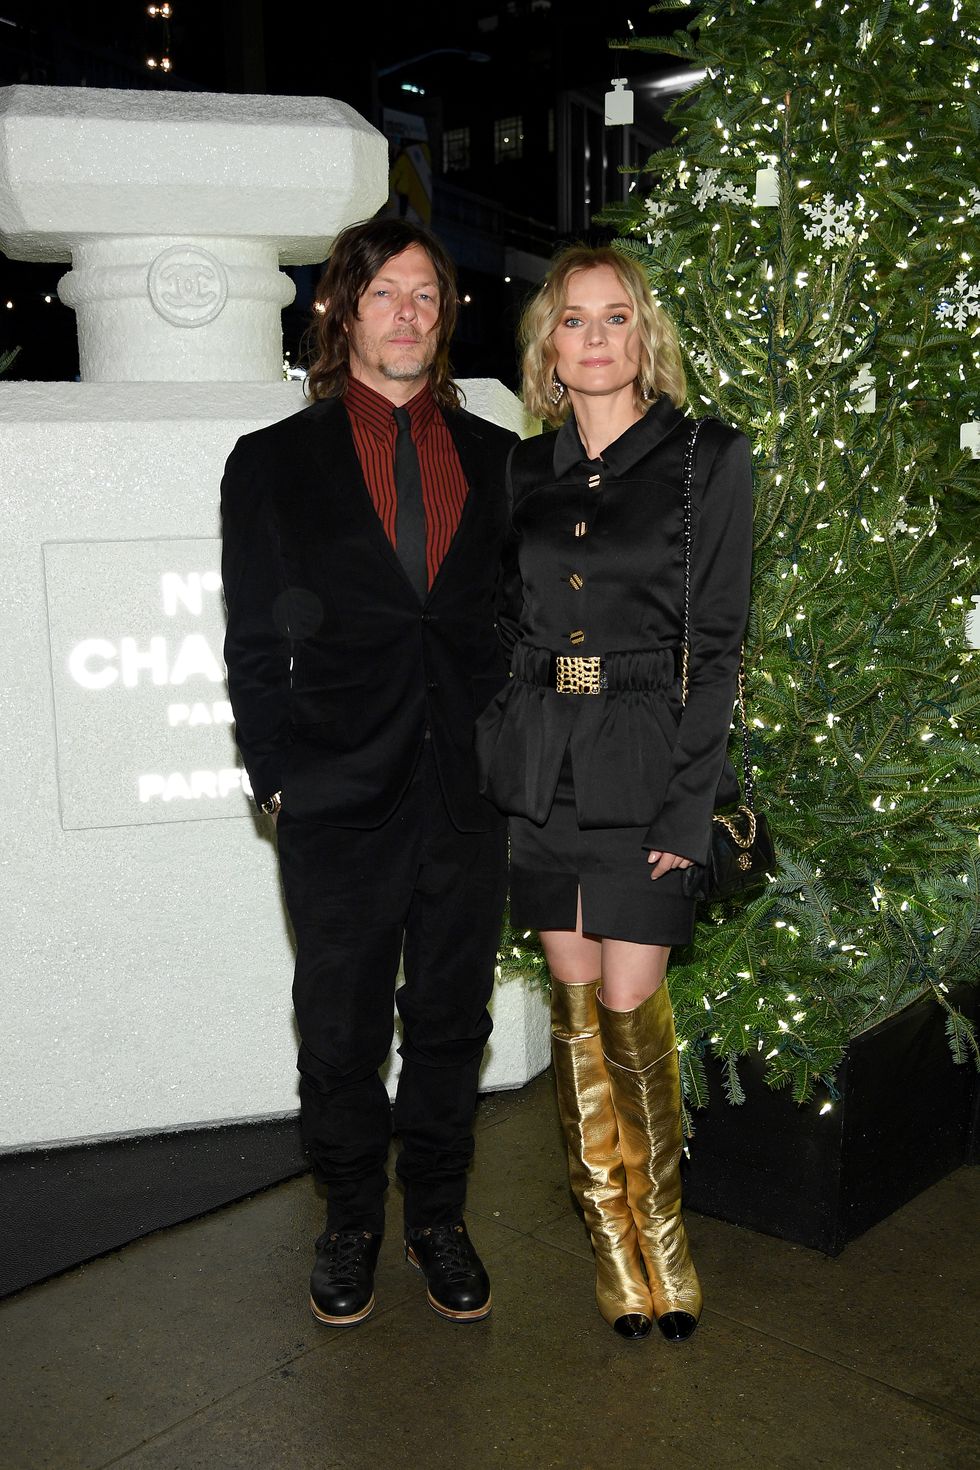 Diane Kruger & Norman Reedus Go Post-Christmas Shopping Together in NYC:  Photo 4406847, Diane Kruger, Norman Reedus Photos